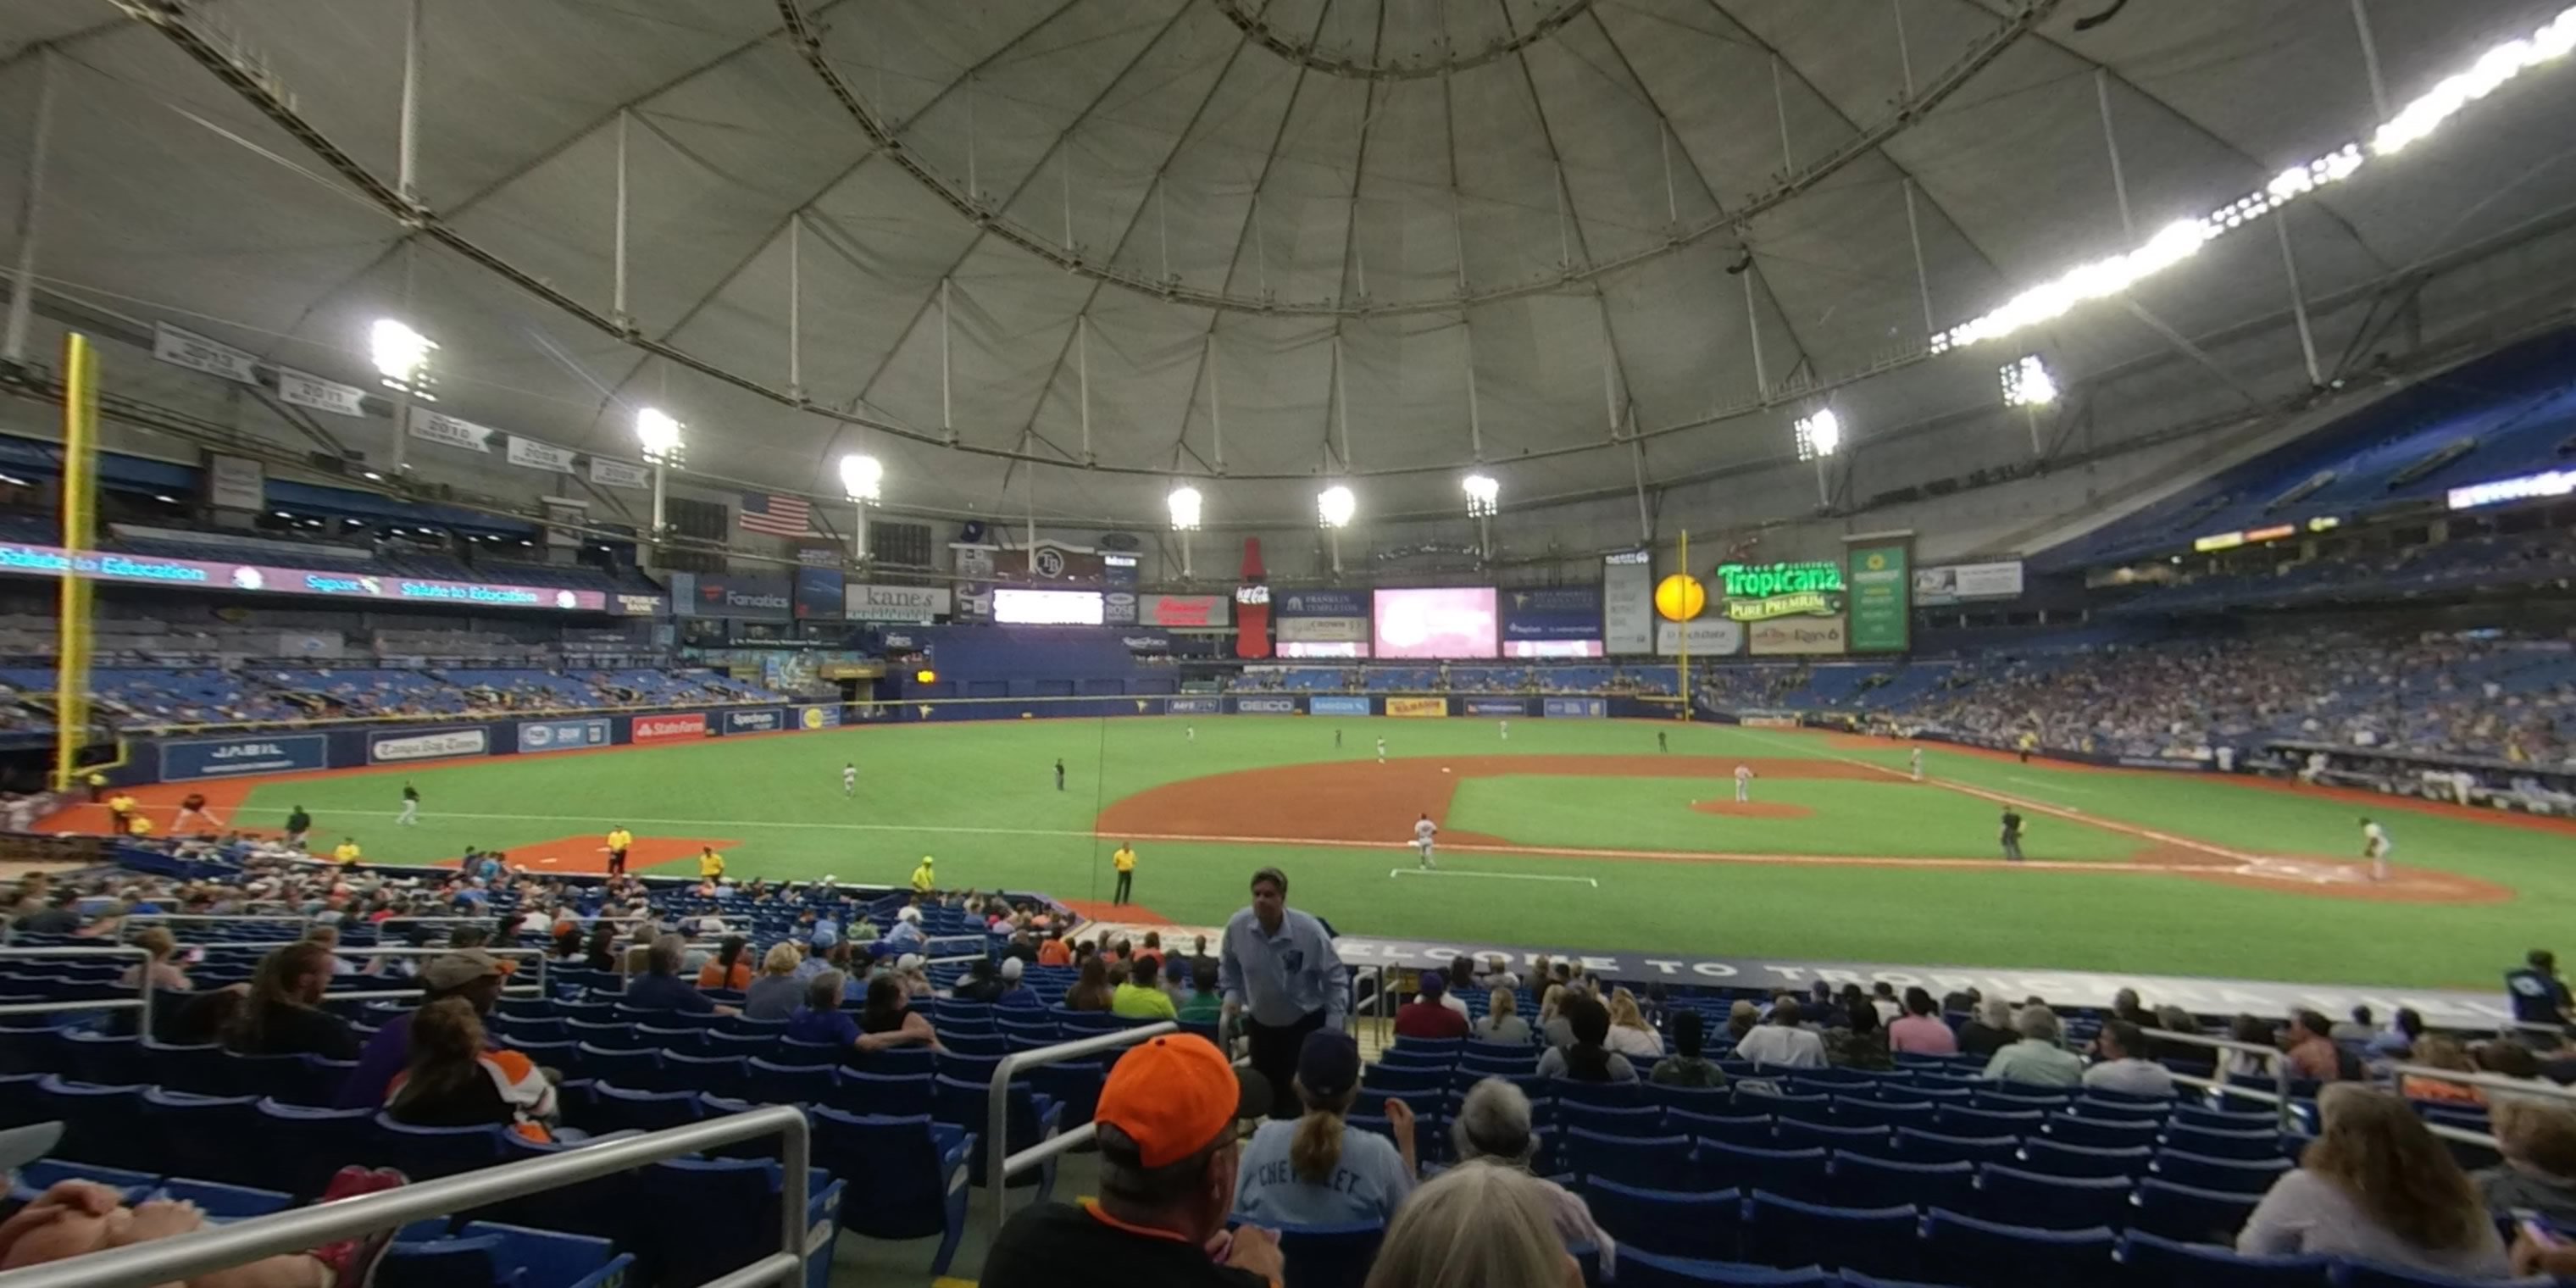 section 117 panoramic seat view  for baseball - tropicana field